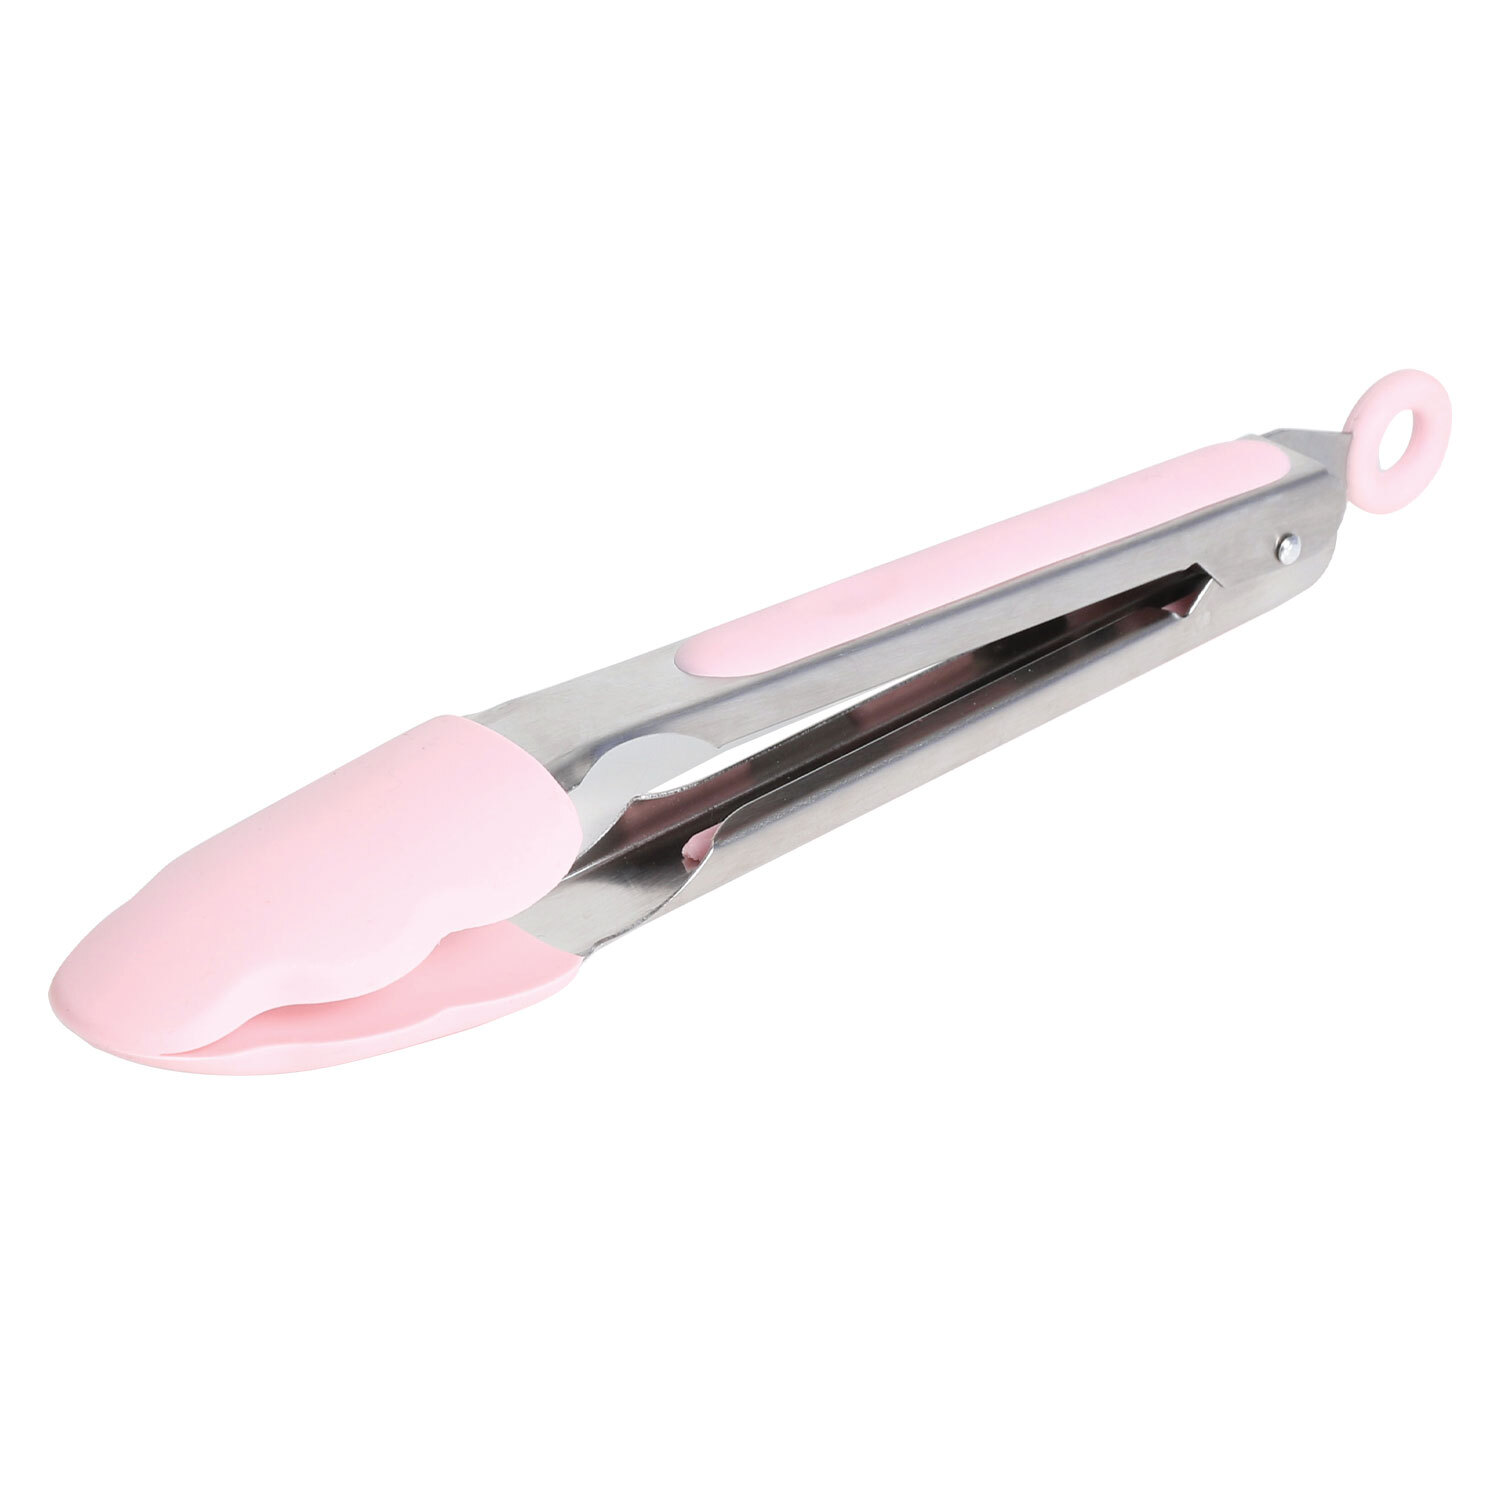 Home Baking Silicone Tongs Image 4